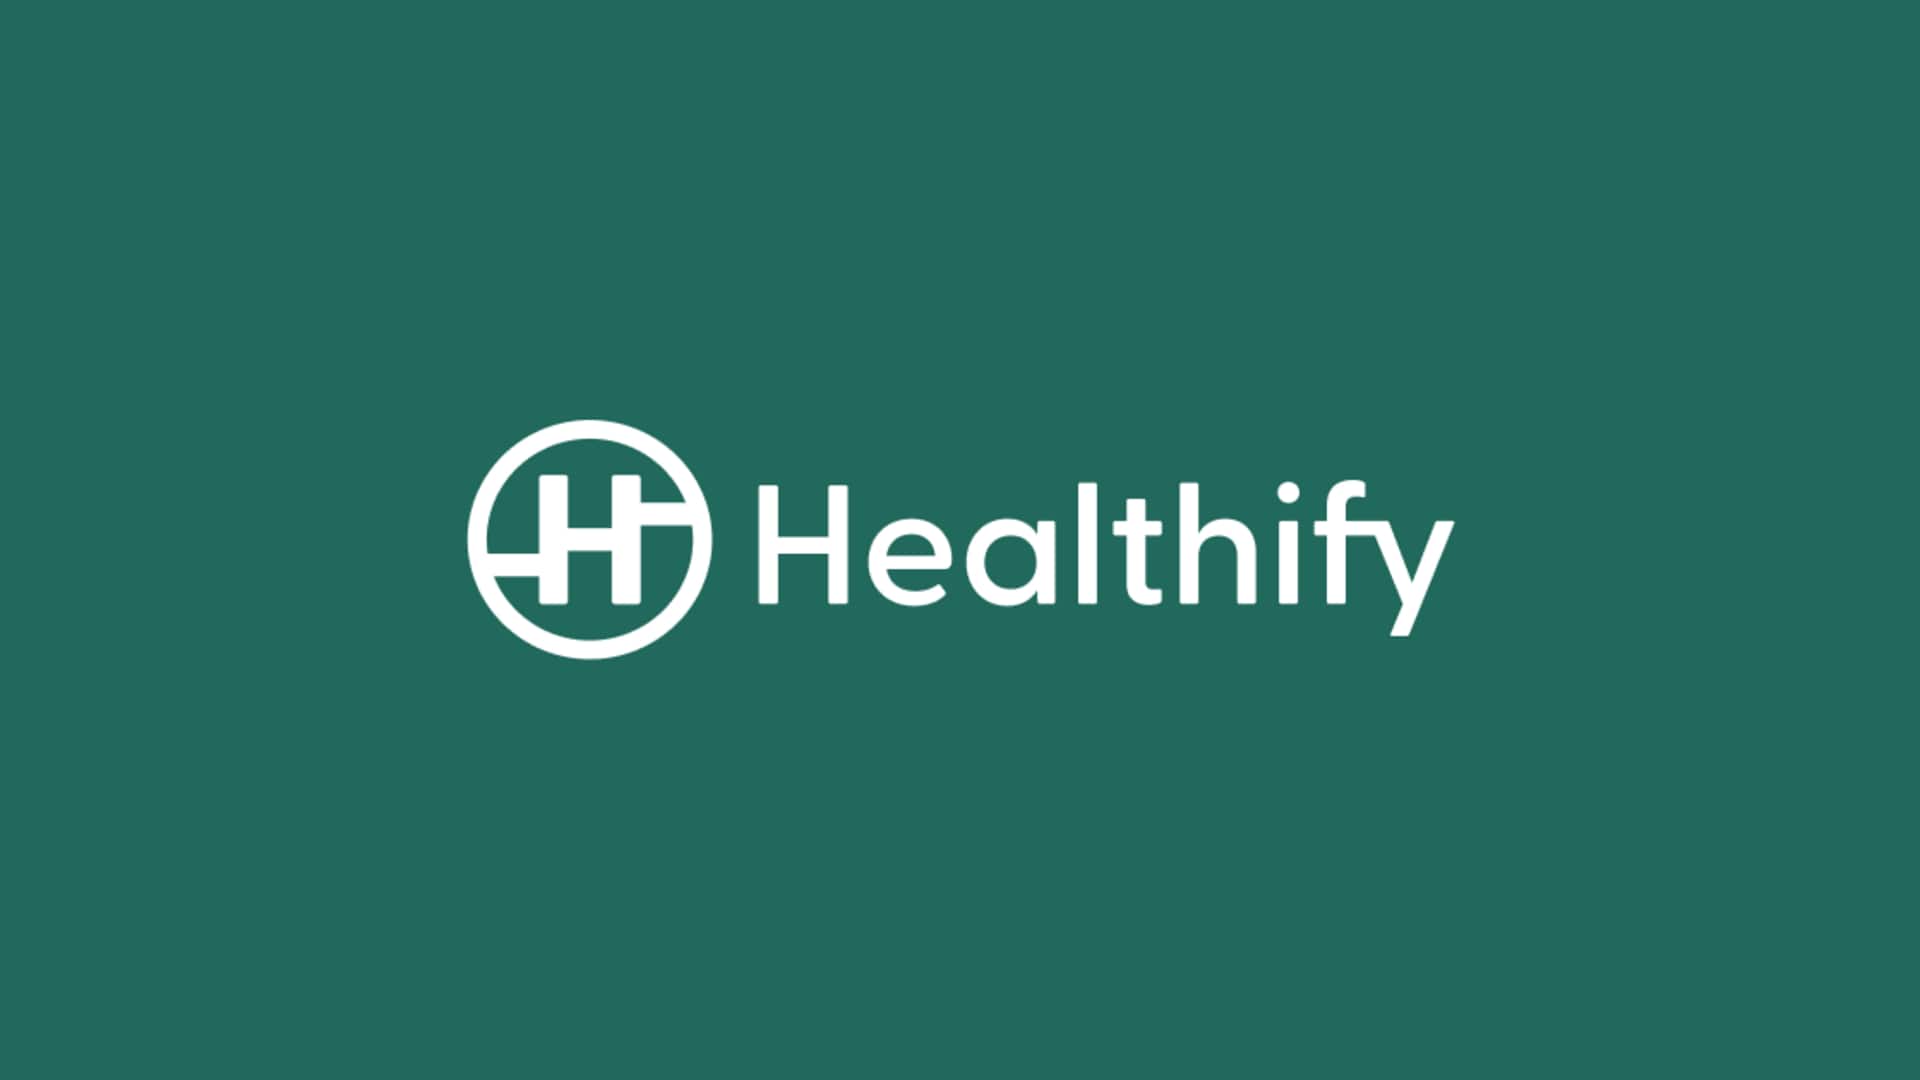 Healthify lays off 150 employees to increase profitability